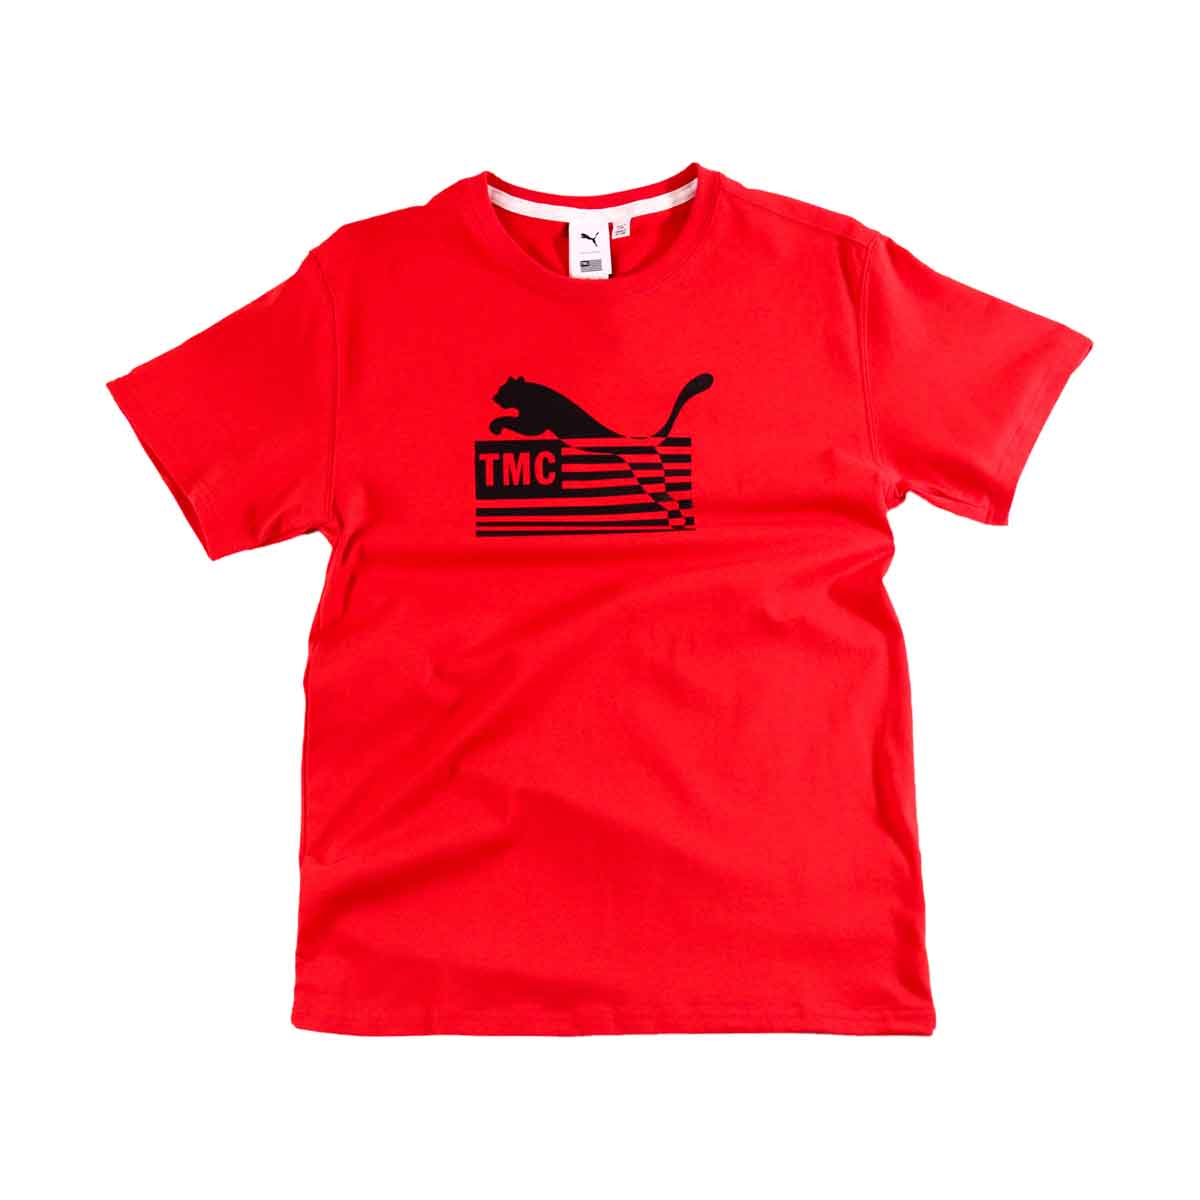 PUMA x TMC Everyday Hussle Collection T-shirt - Red